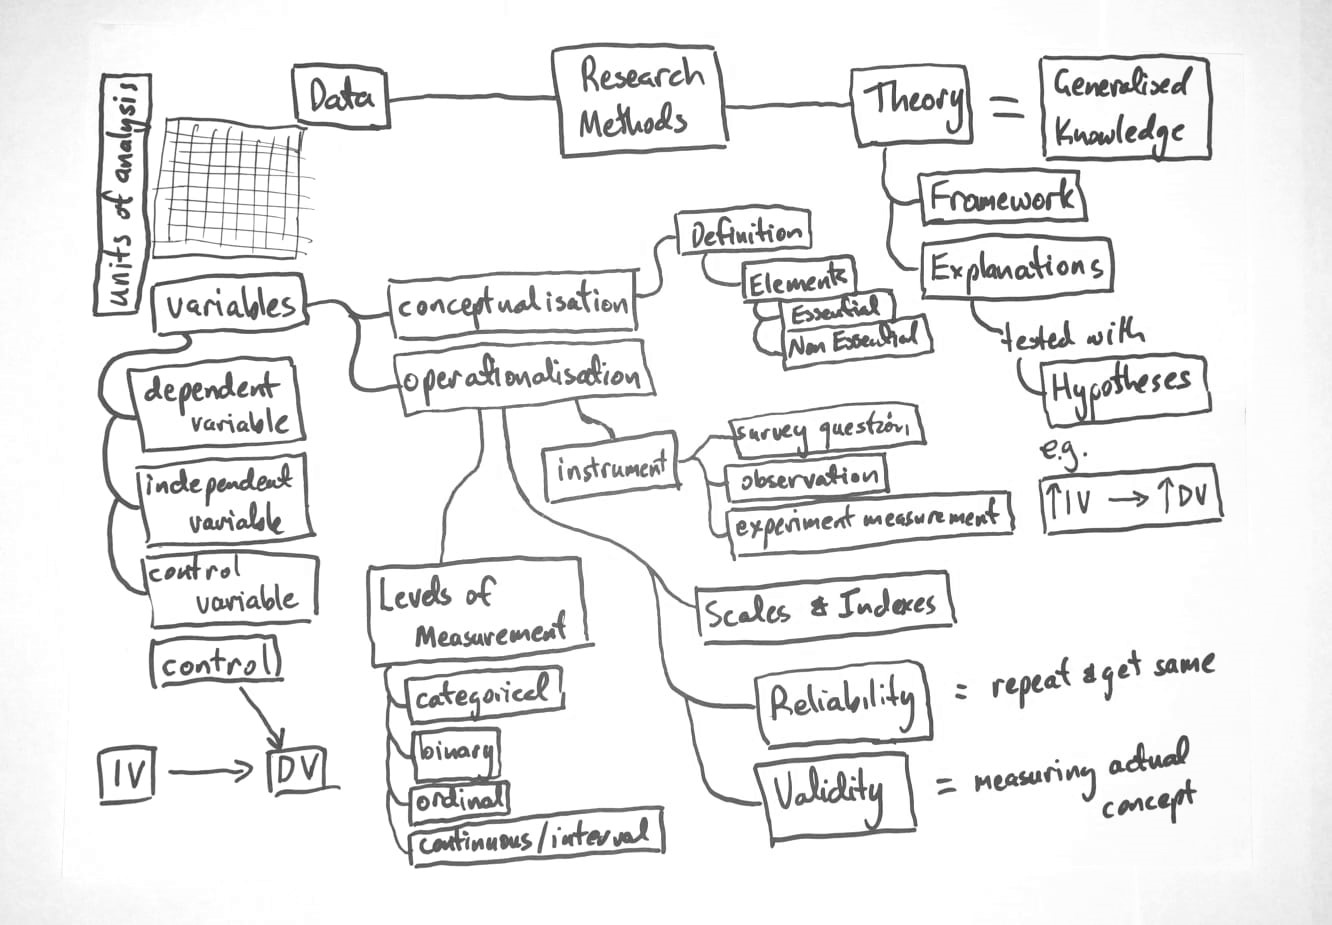 Concept Map of Week 2: Research Methods